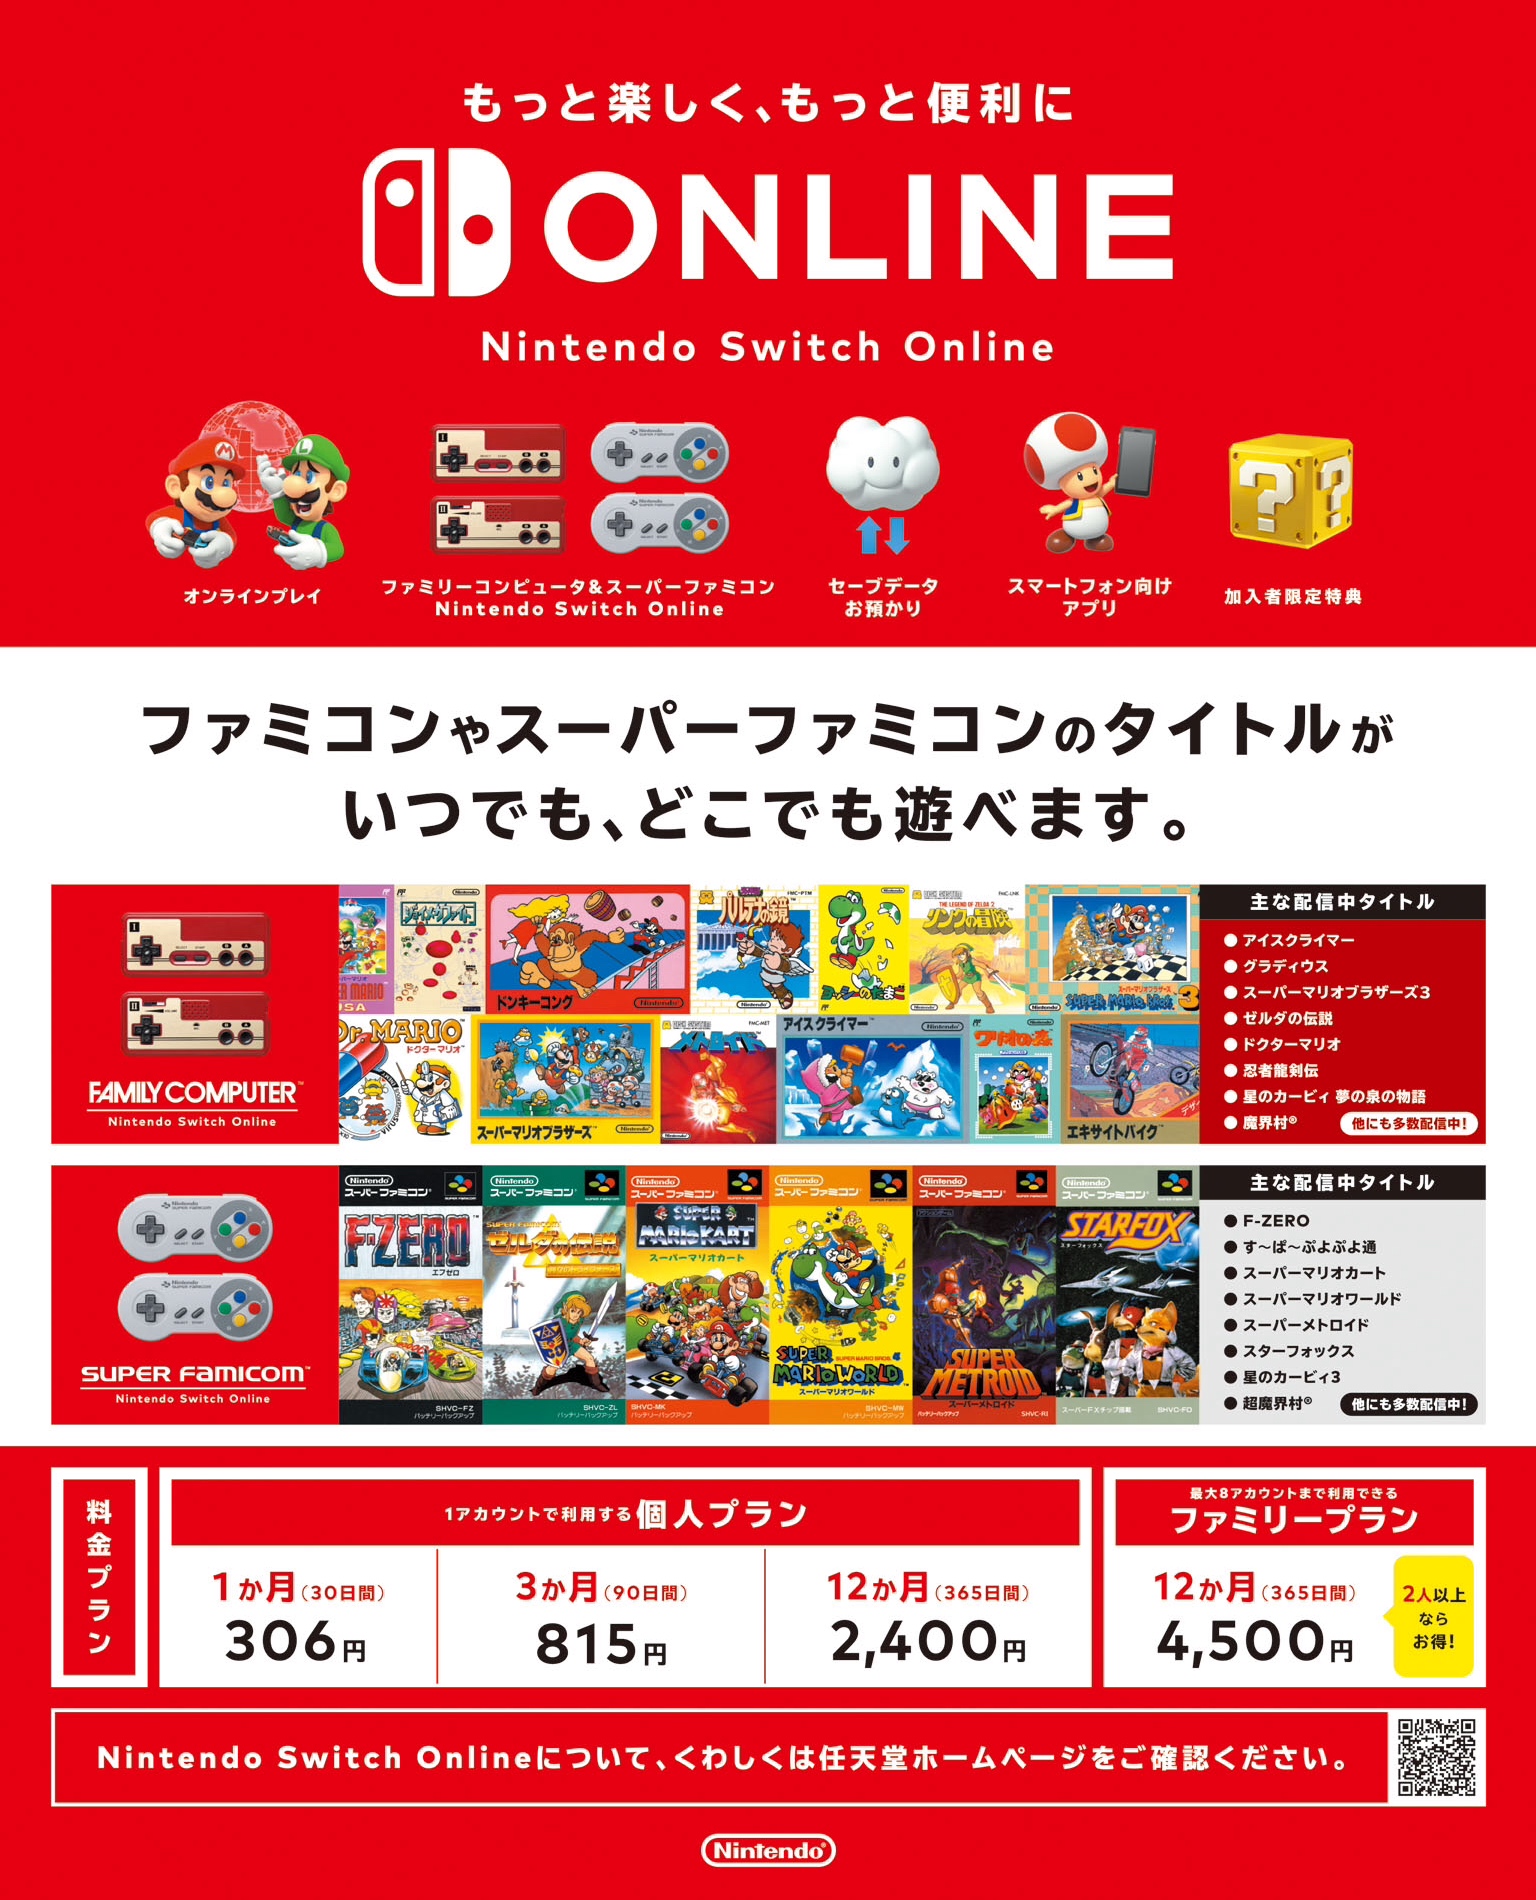 family computer nintendo switch online